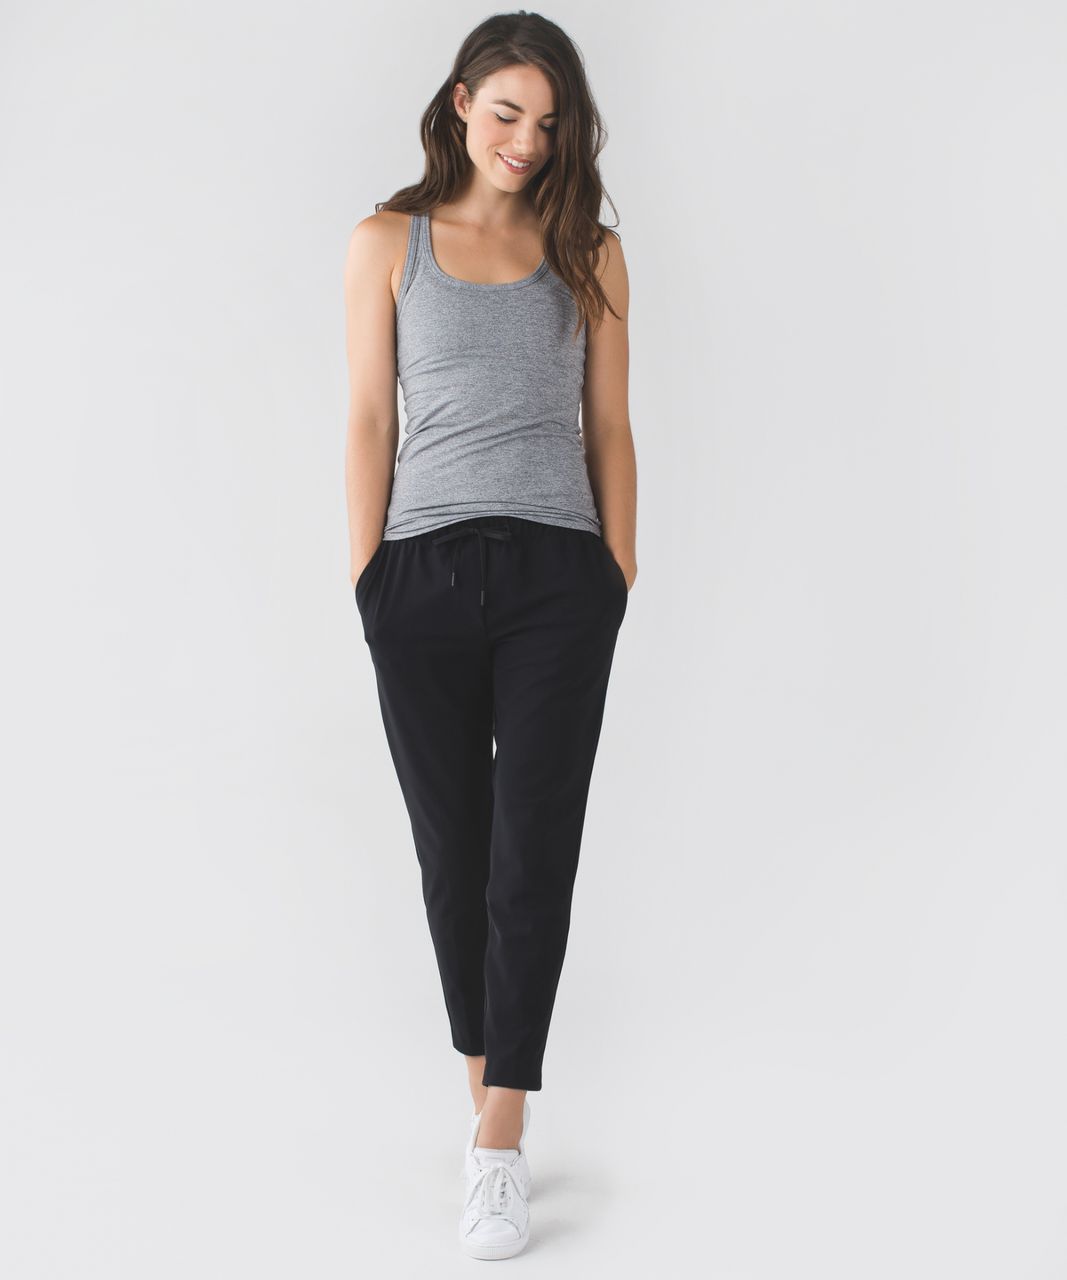 LULULEMON Womens Jet Crop Slim Pants Size 8 Wee Are From Space